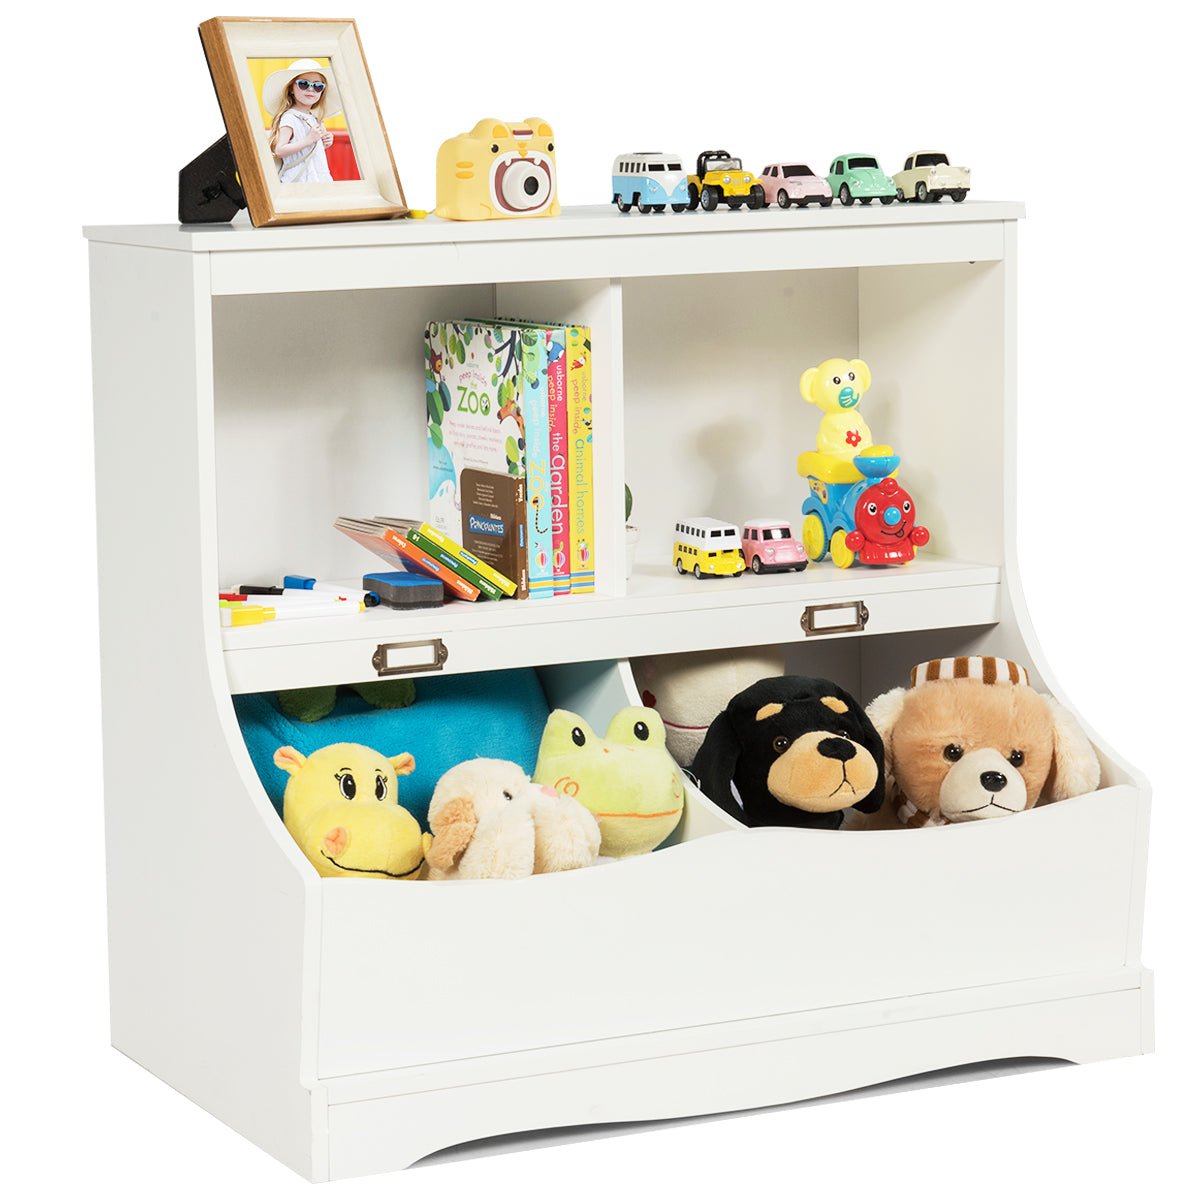 Stylish 2-Tier Toy Shelf - Lacquered Surface for Kid's Room Organization